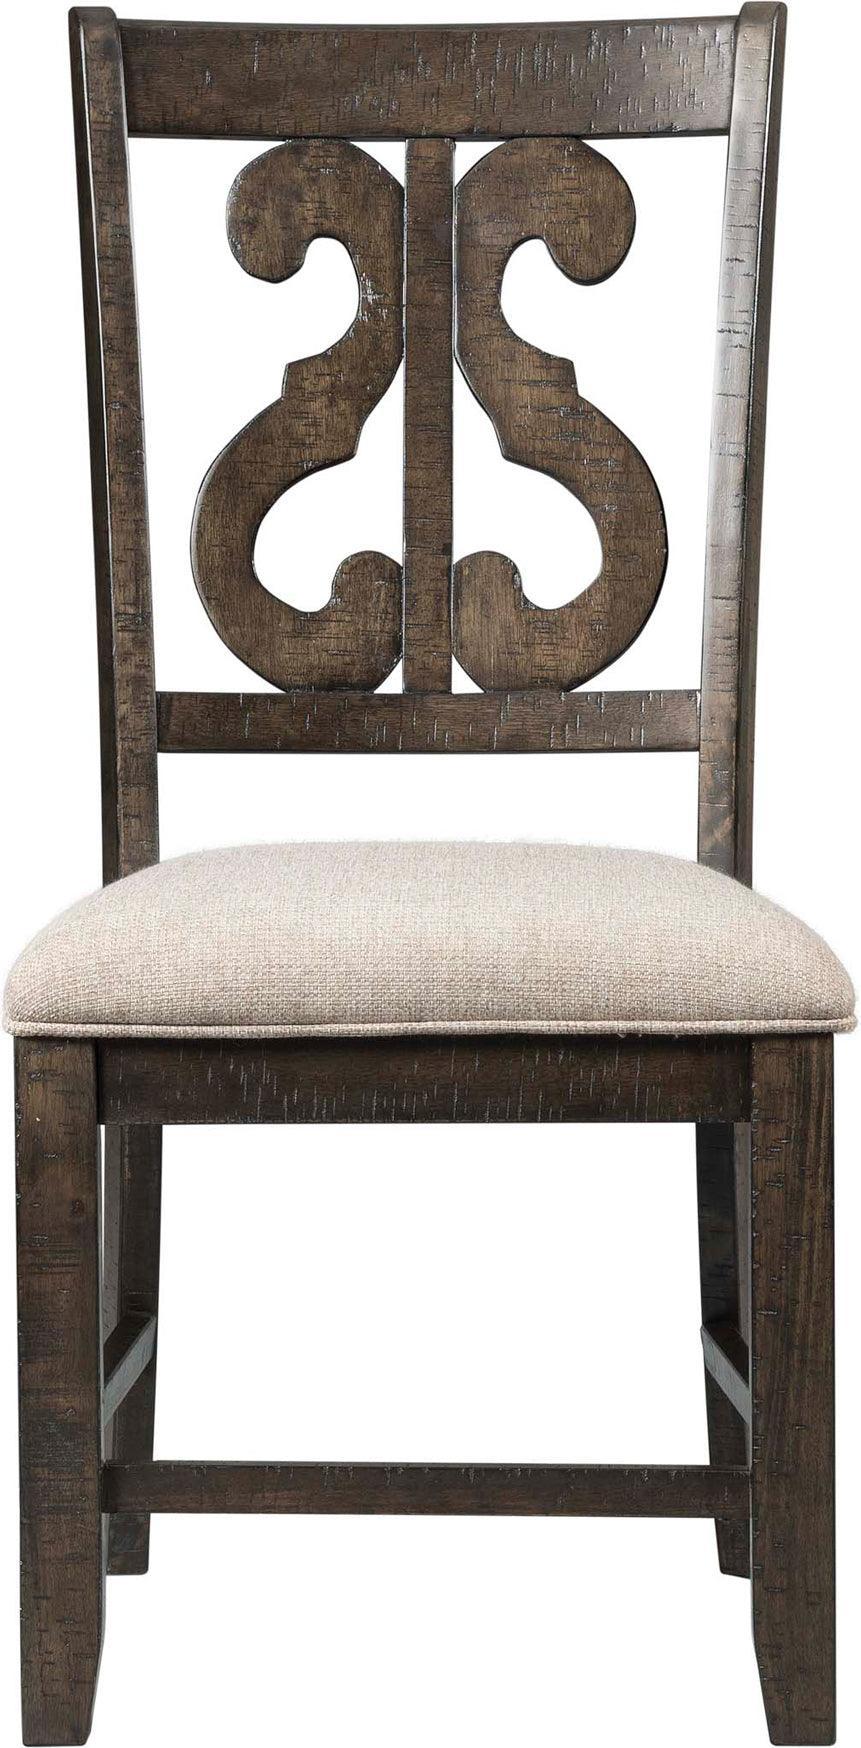 Elements Dining Chairs - Stanford Wooden Swirl Back Side Chair Smokey Walnut (Set of 2)